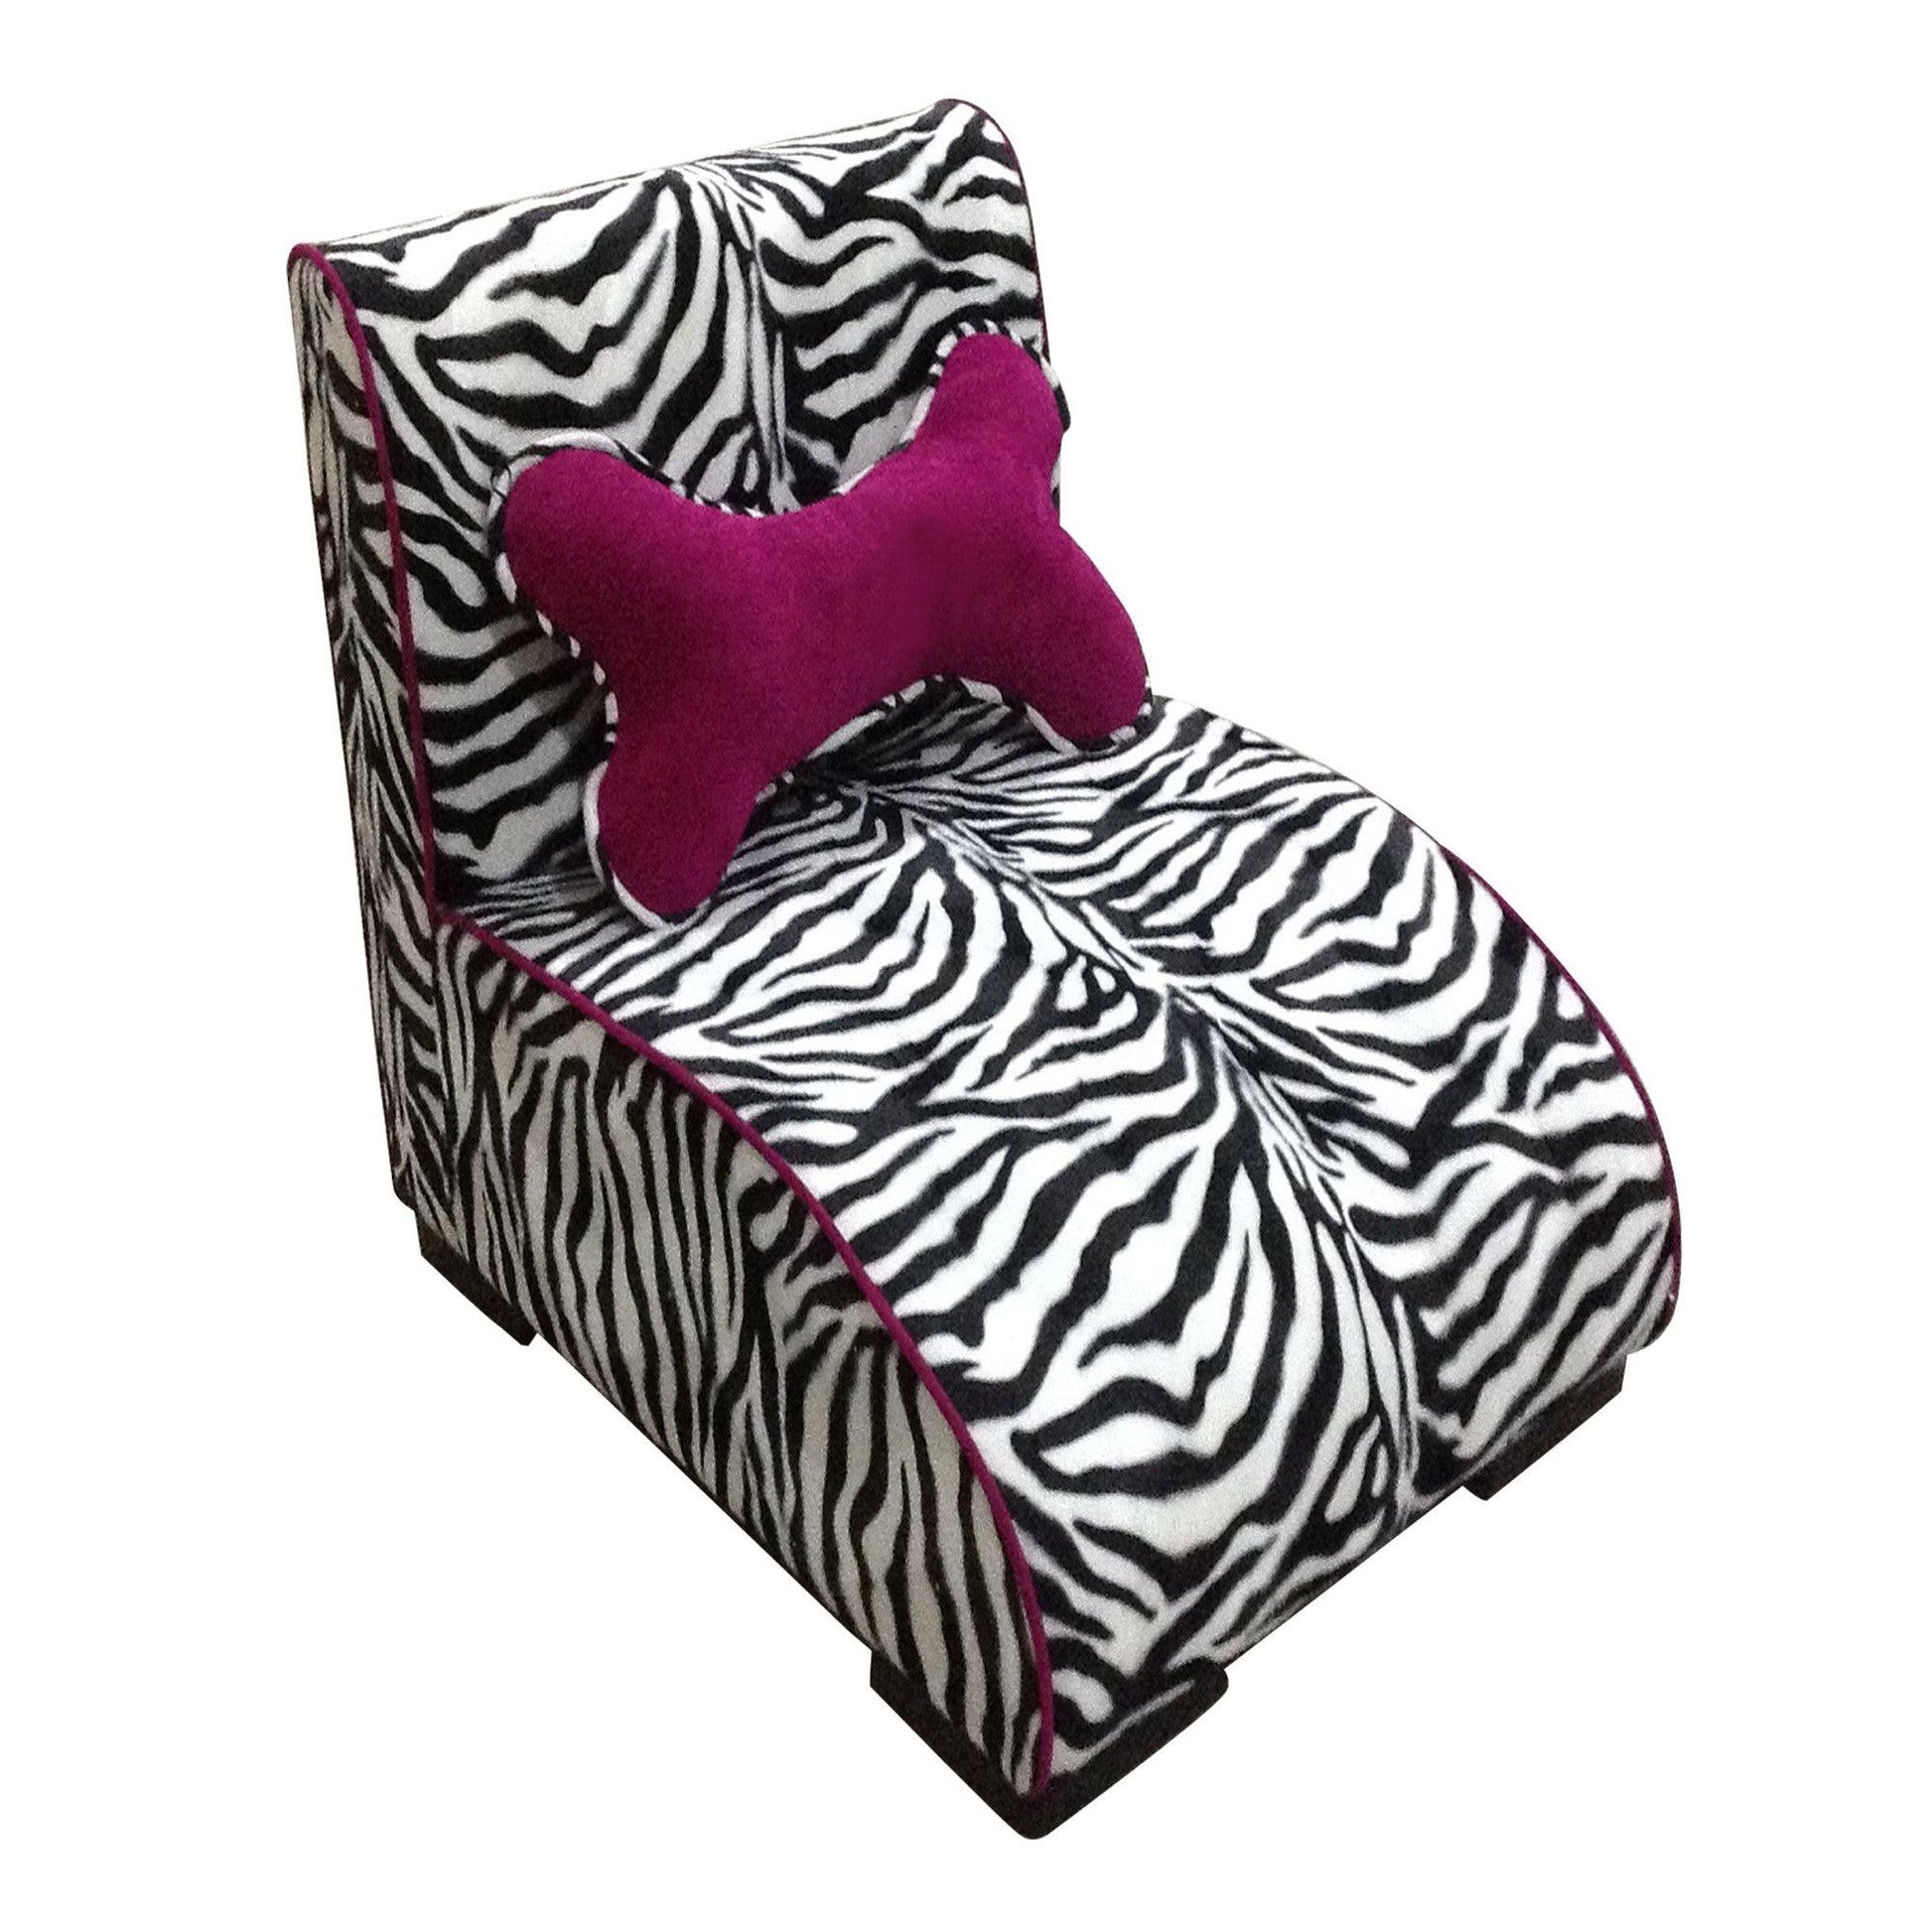 23" Zebra Print Upholstered Chaise Lounge Dog Bed with Pillow - FurniFindUSA